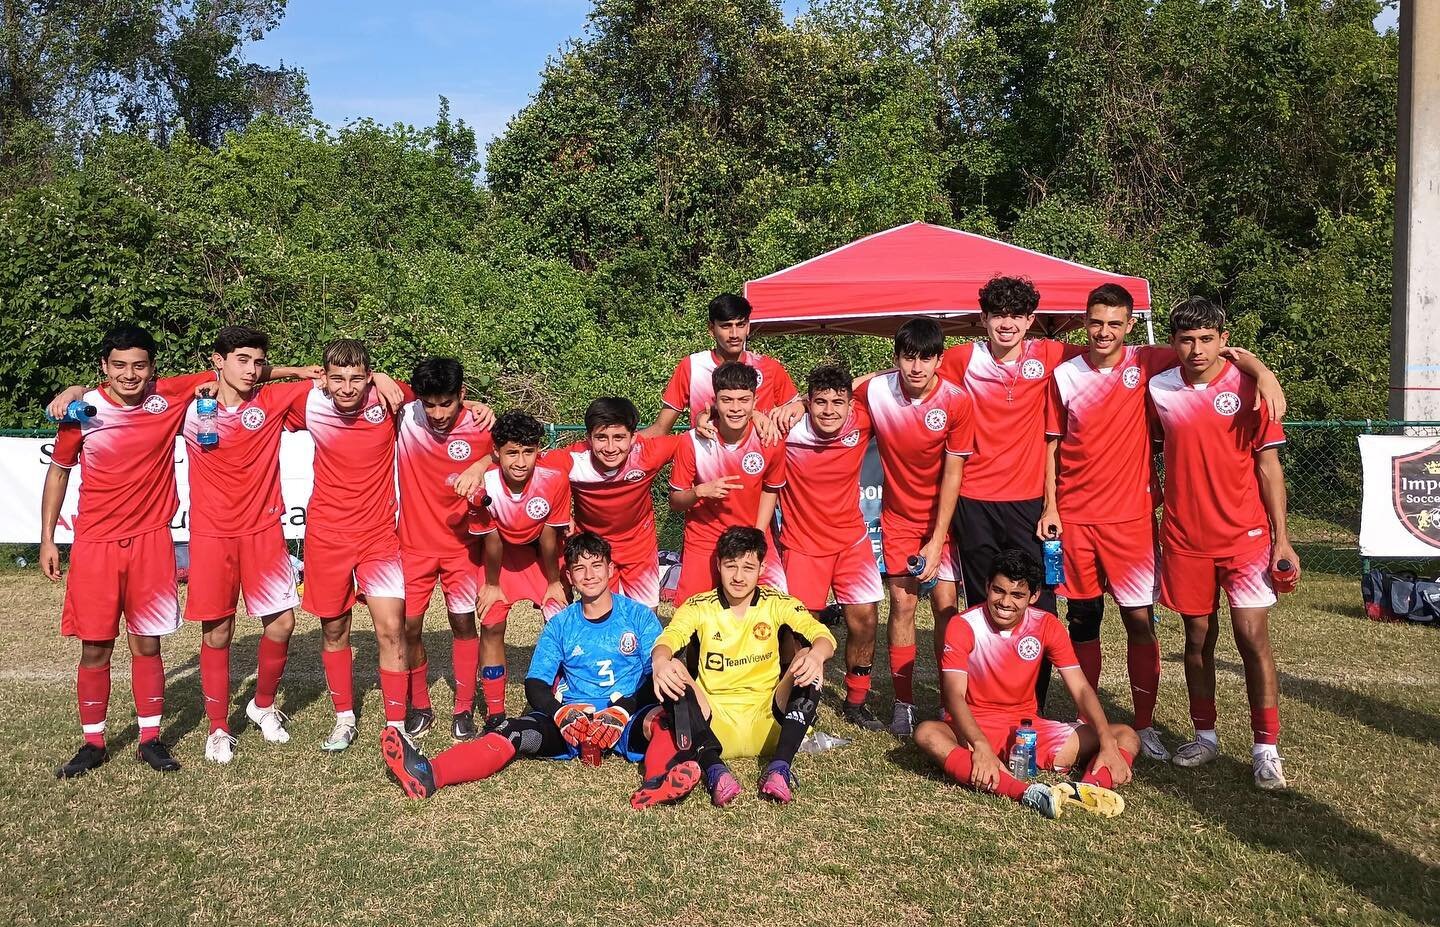 The press is burning up!

Just received word that the U17 Diablos not only advanced to the @stxsoccer South Texas Cup state finals, but they are playing the championship match today at 6pm!

Let&rsquo;s goooooooo!